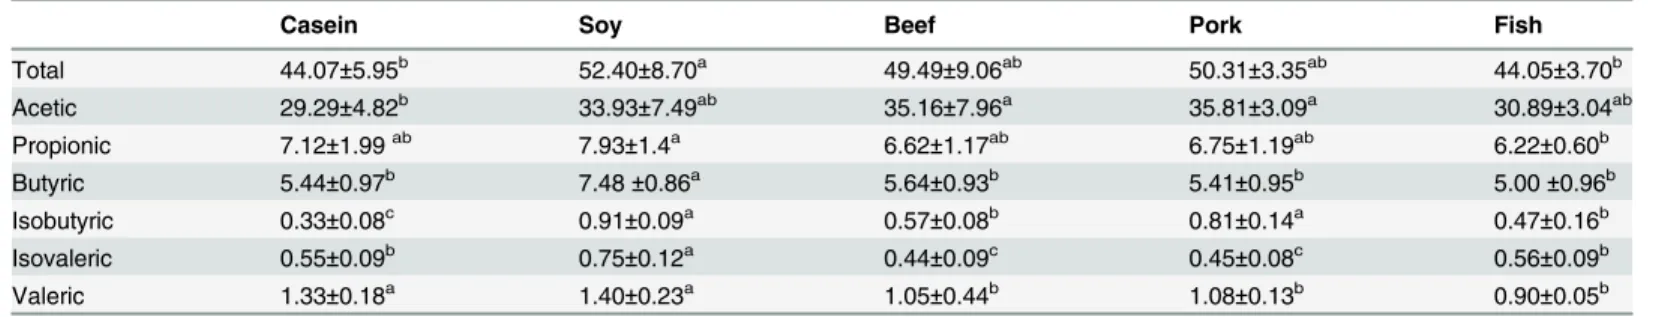 Table 2. Effect of the type of dietary protein on SCFA levels (μmol/g, means ± standard deviations).